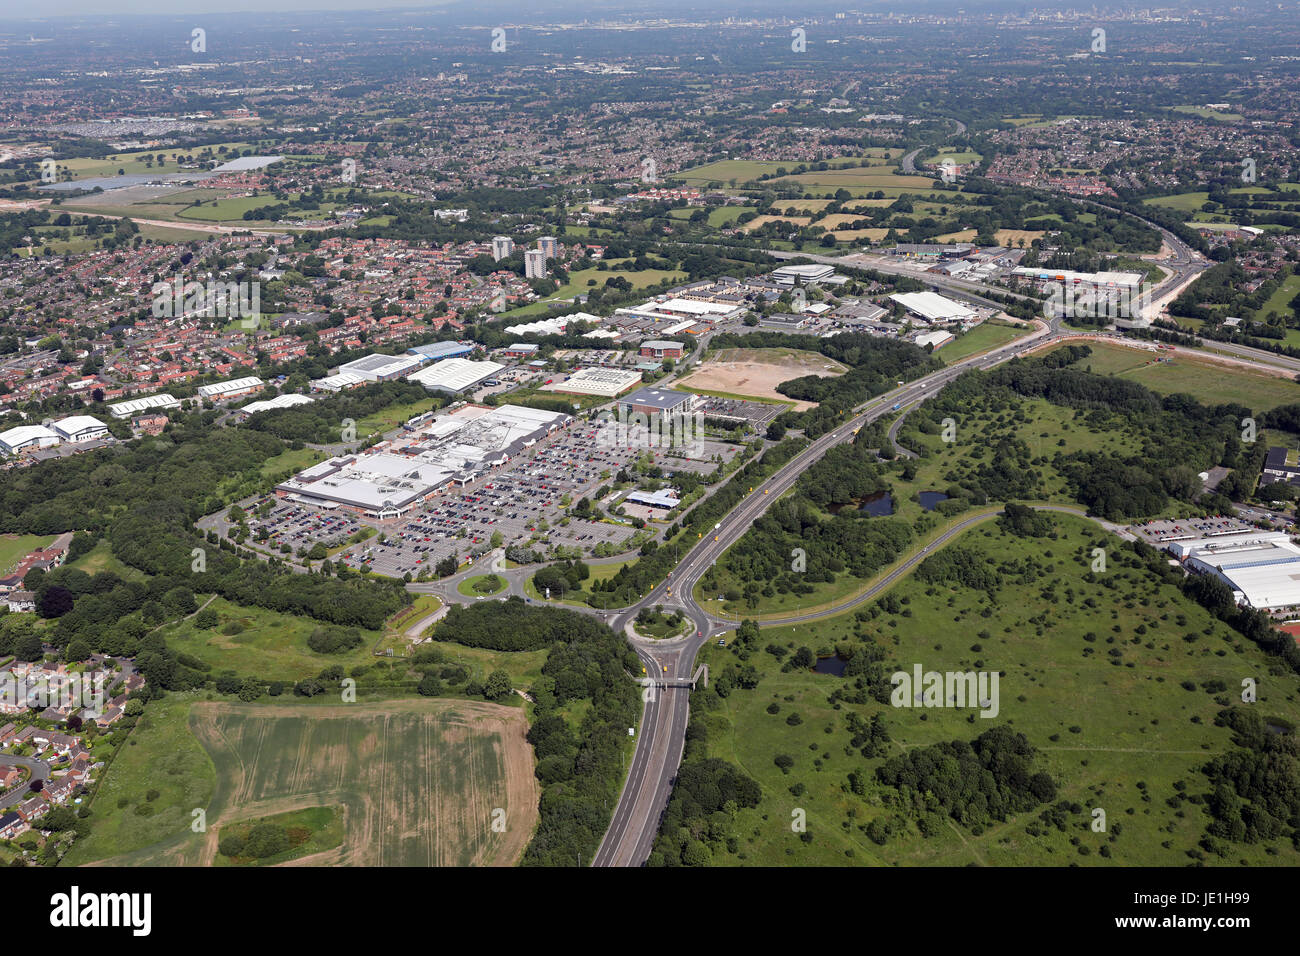 aerial view of Handforth Dean shopping retail estate park, UK Stock Photo